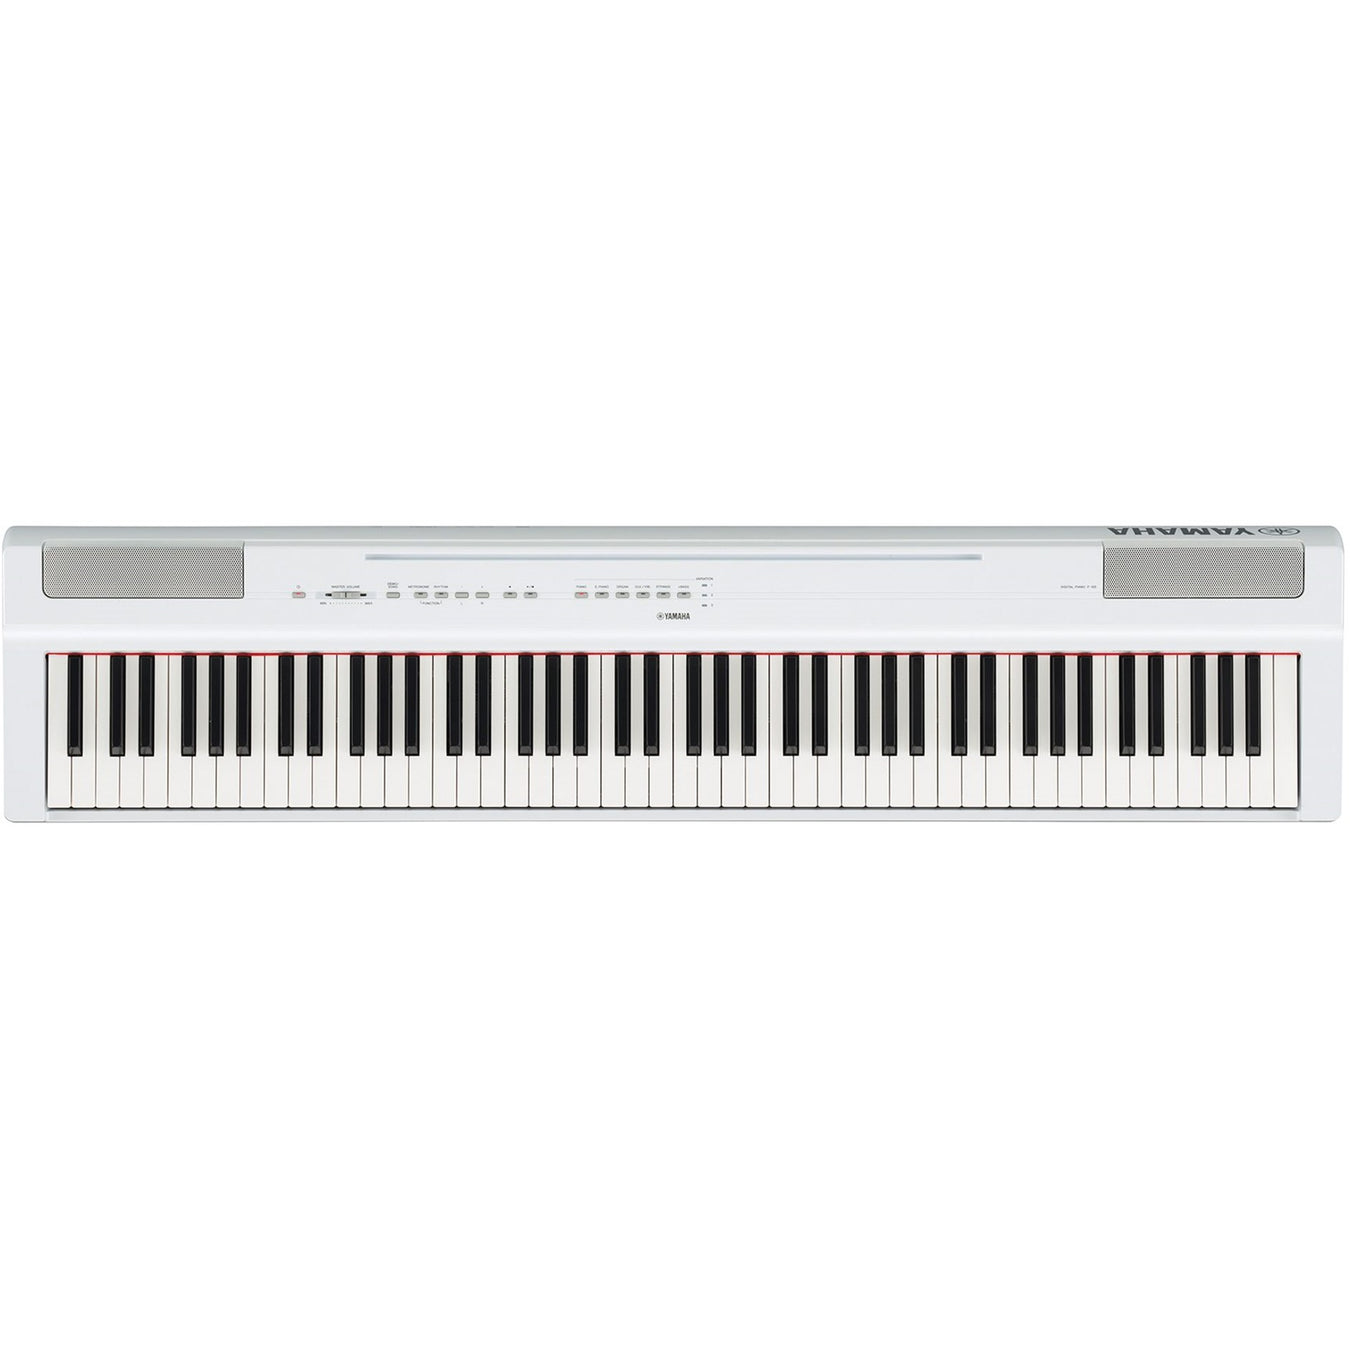 Back To School 2021 Digital Pianos, Keyboards & Synthesizers Collection